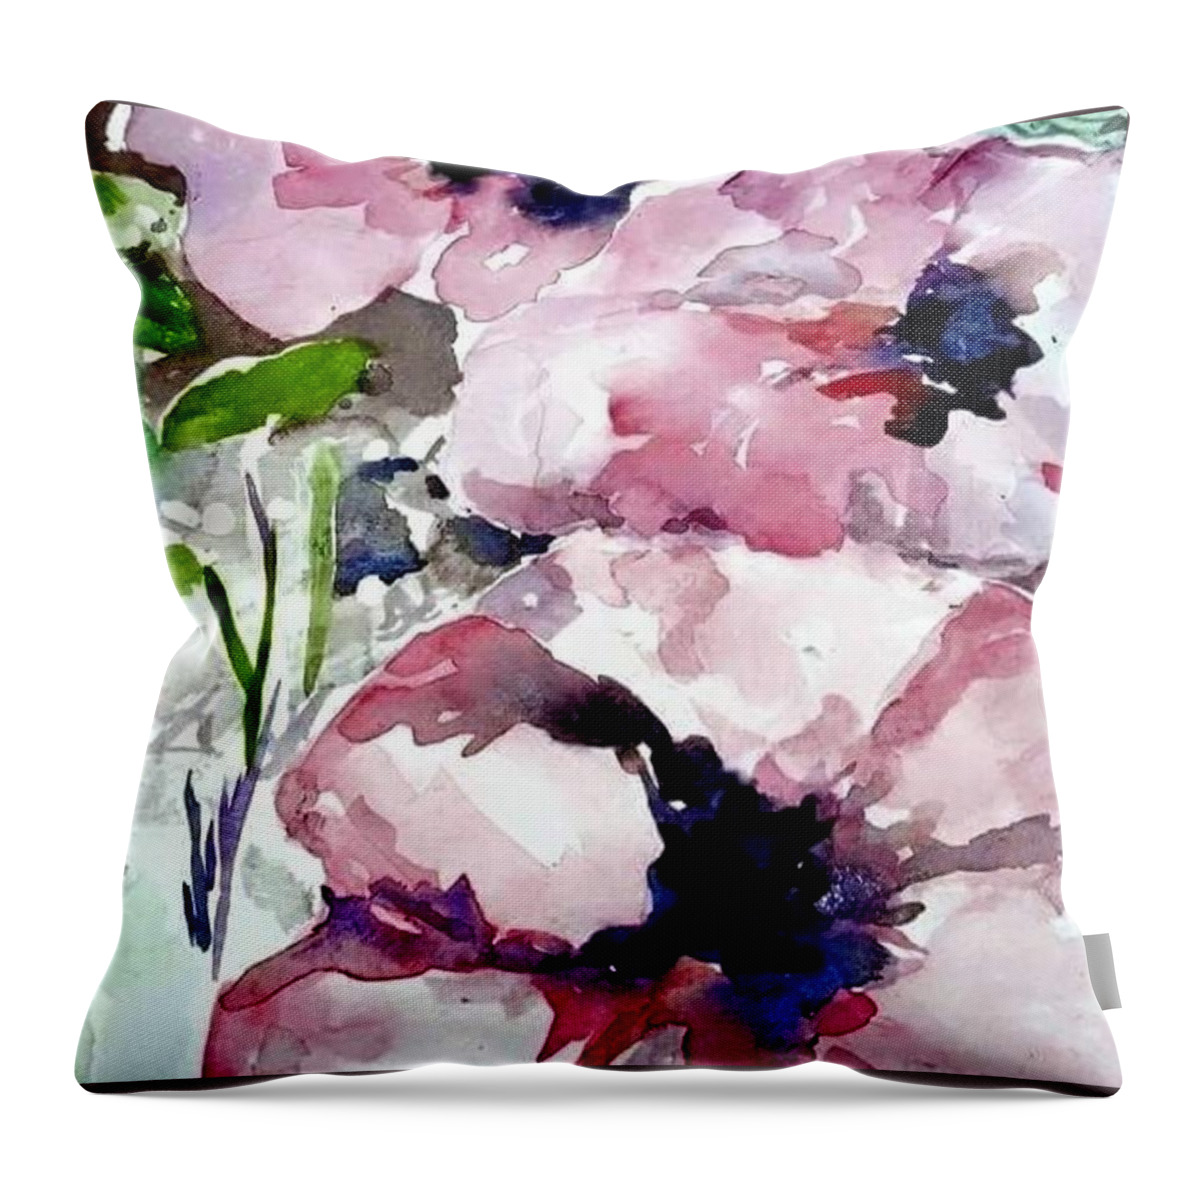 Gardens Throw Pillow featuring the painting Beauties by Julie TuckerDemps